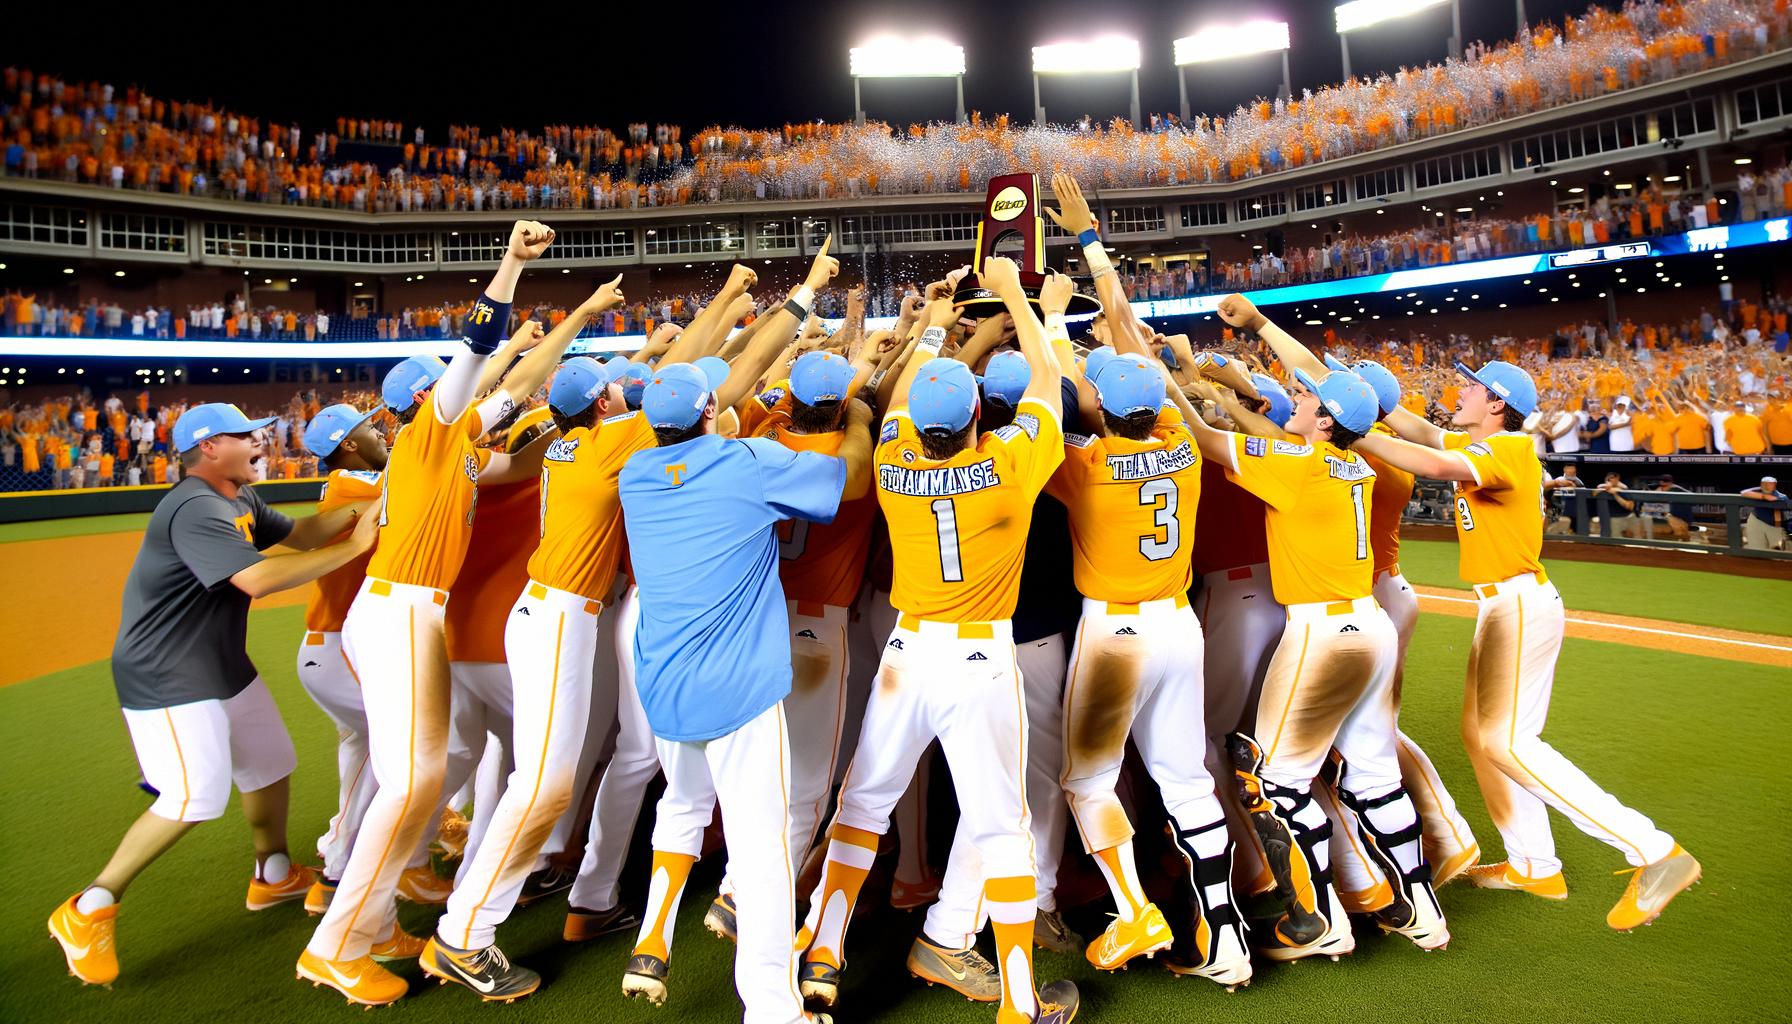 Tennessee Volunteers win their first College World Series title.